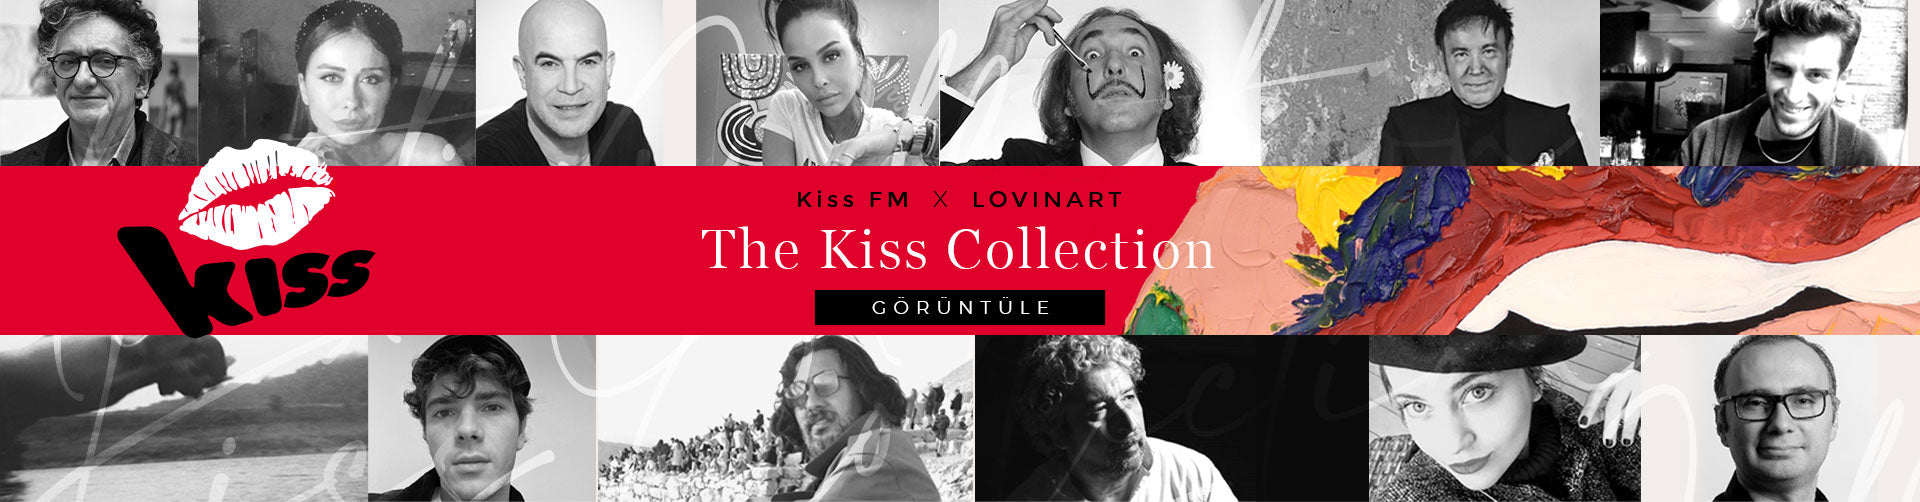 The Kiss Collection